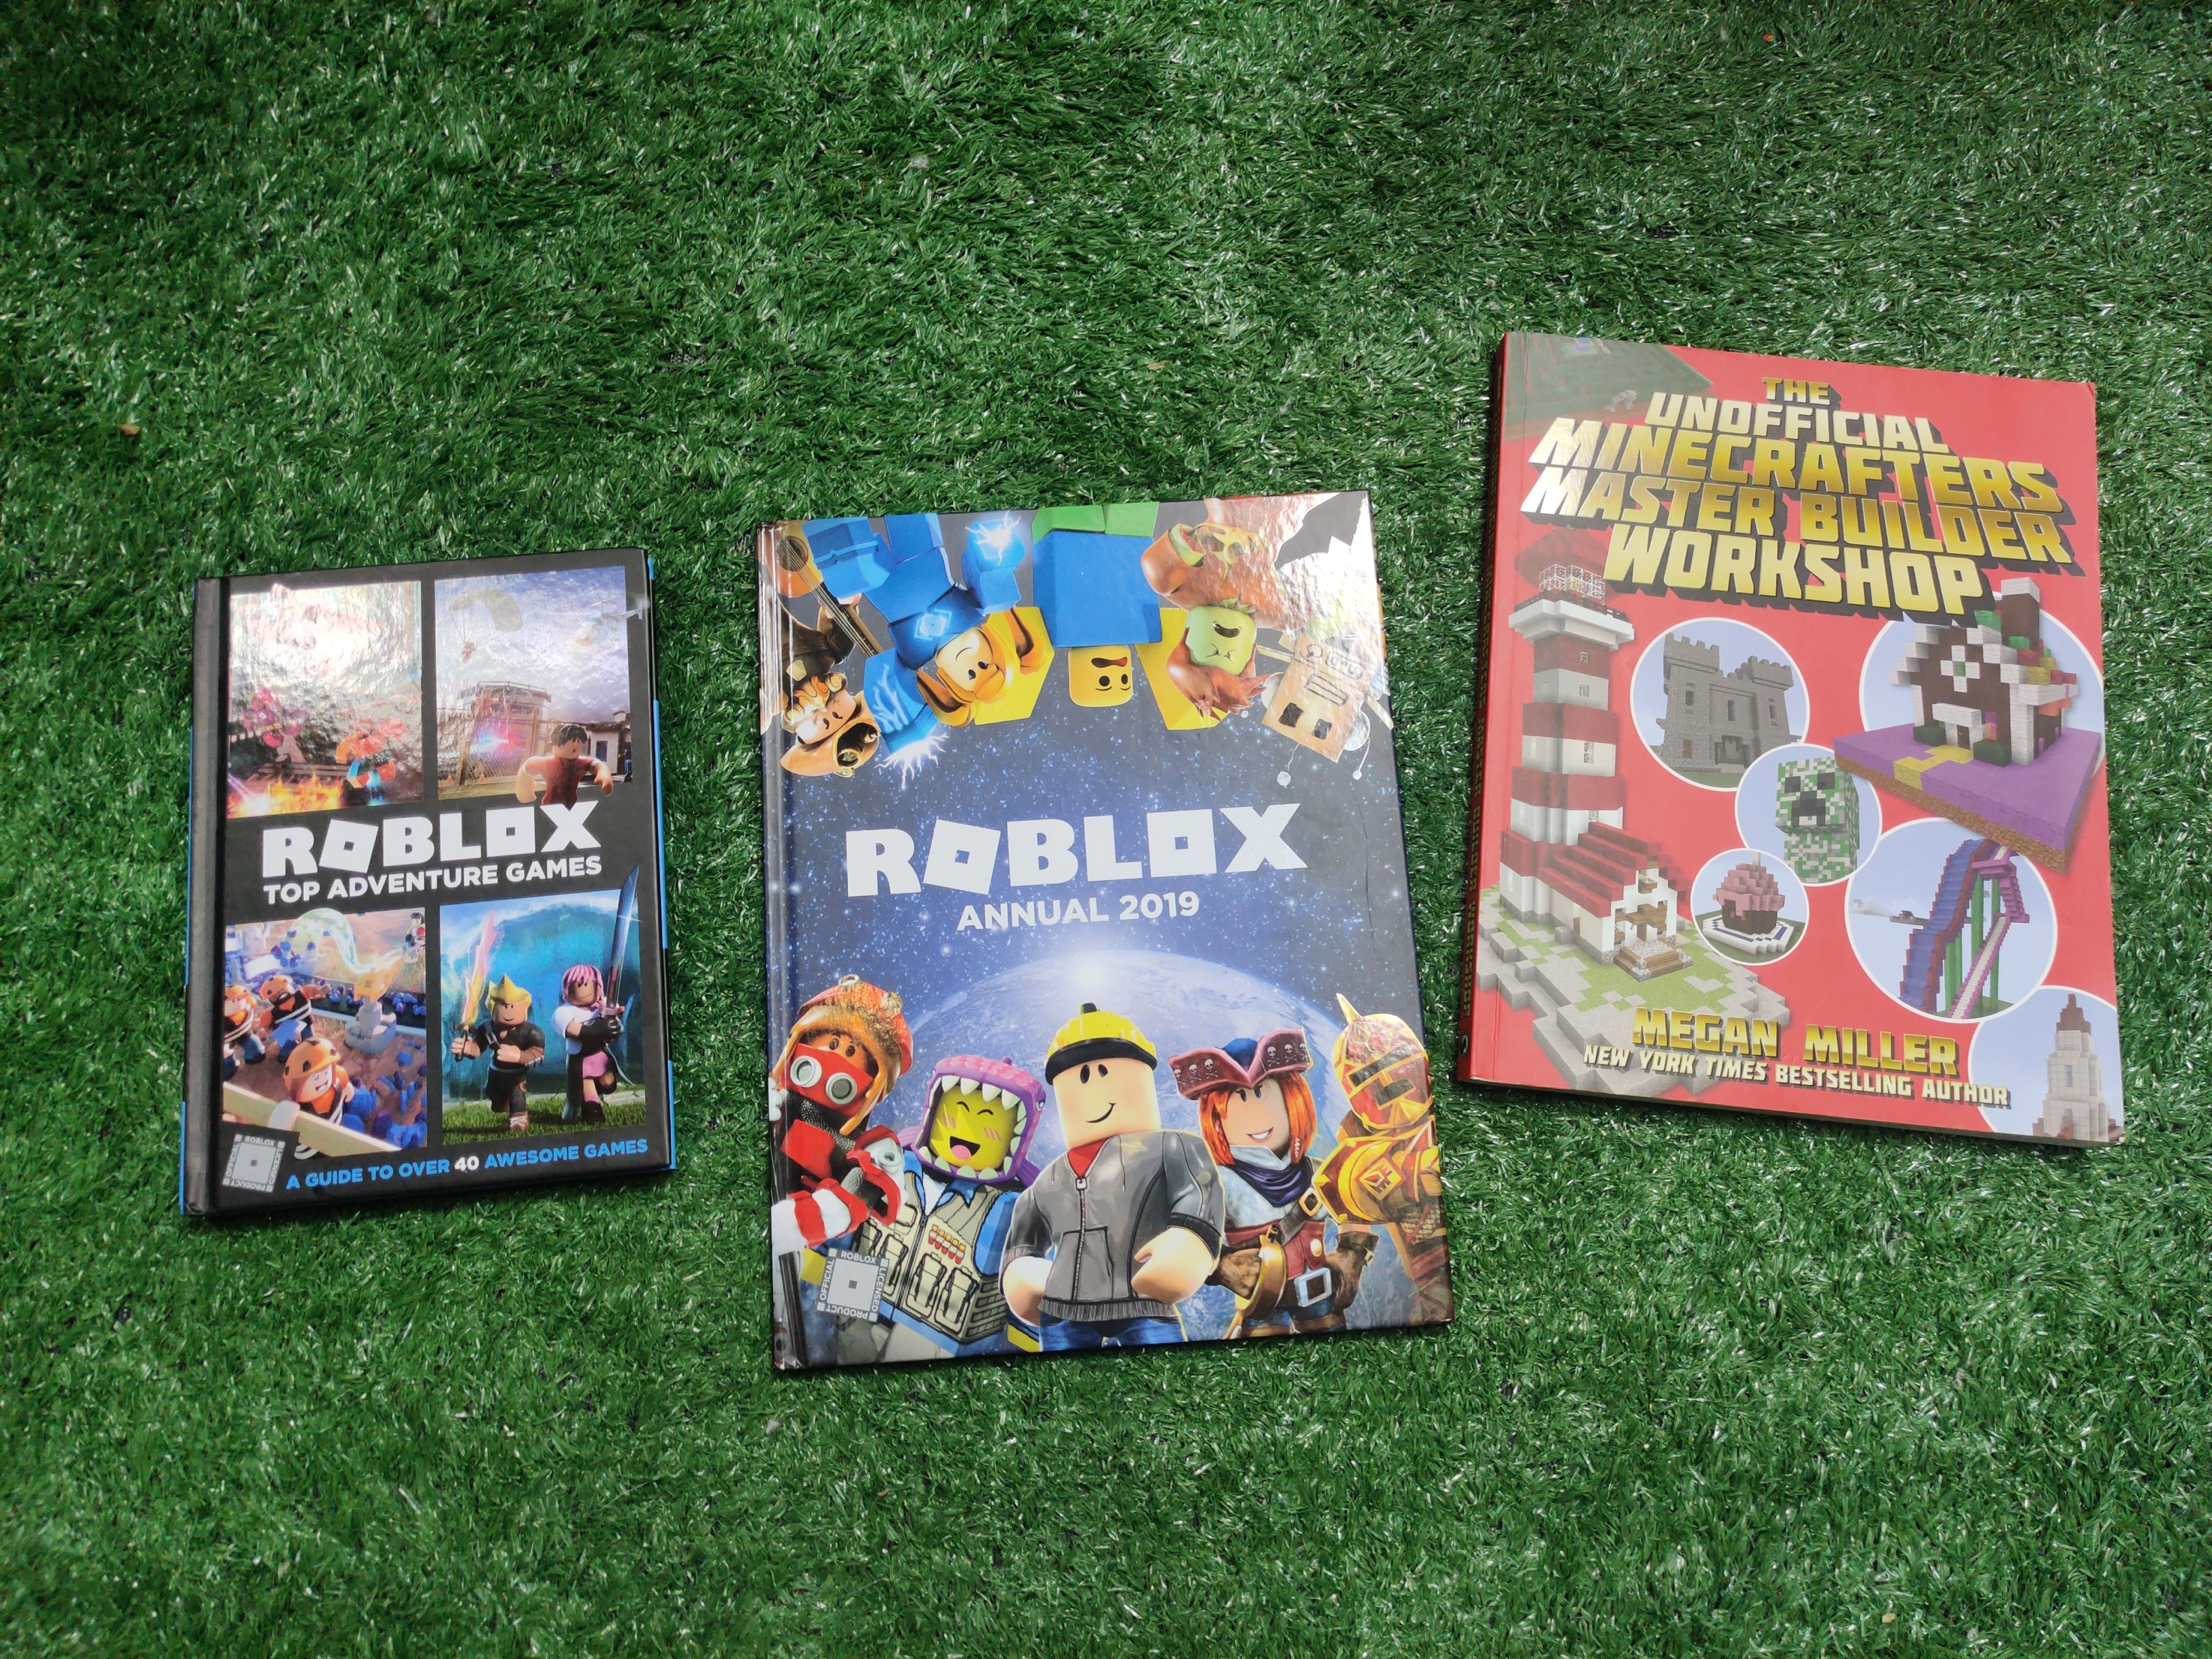 Minecraft Master Builder Workshop Hobbies Toys Books Magazines Children S Books On Carousell - roblox the essential guide scholastic